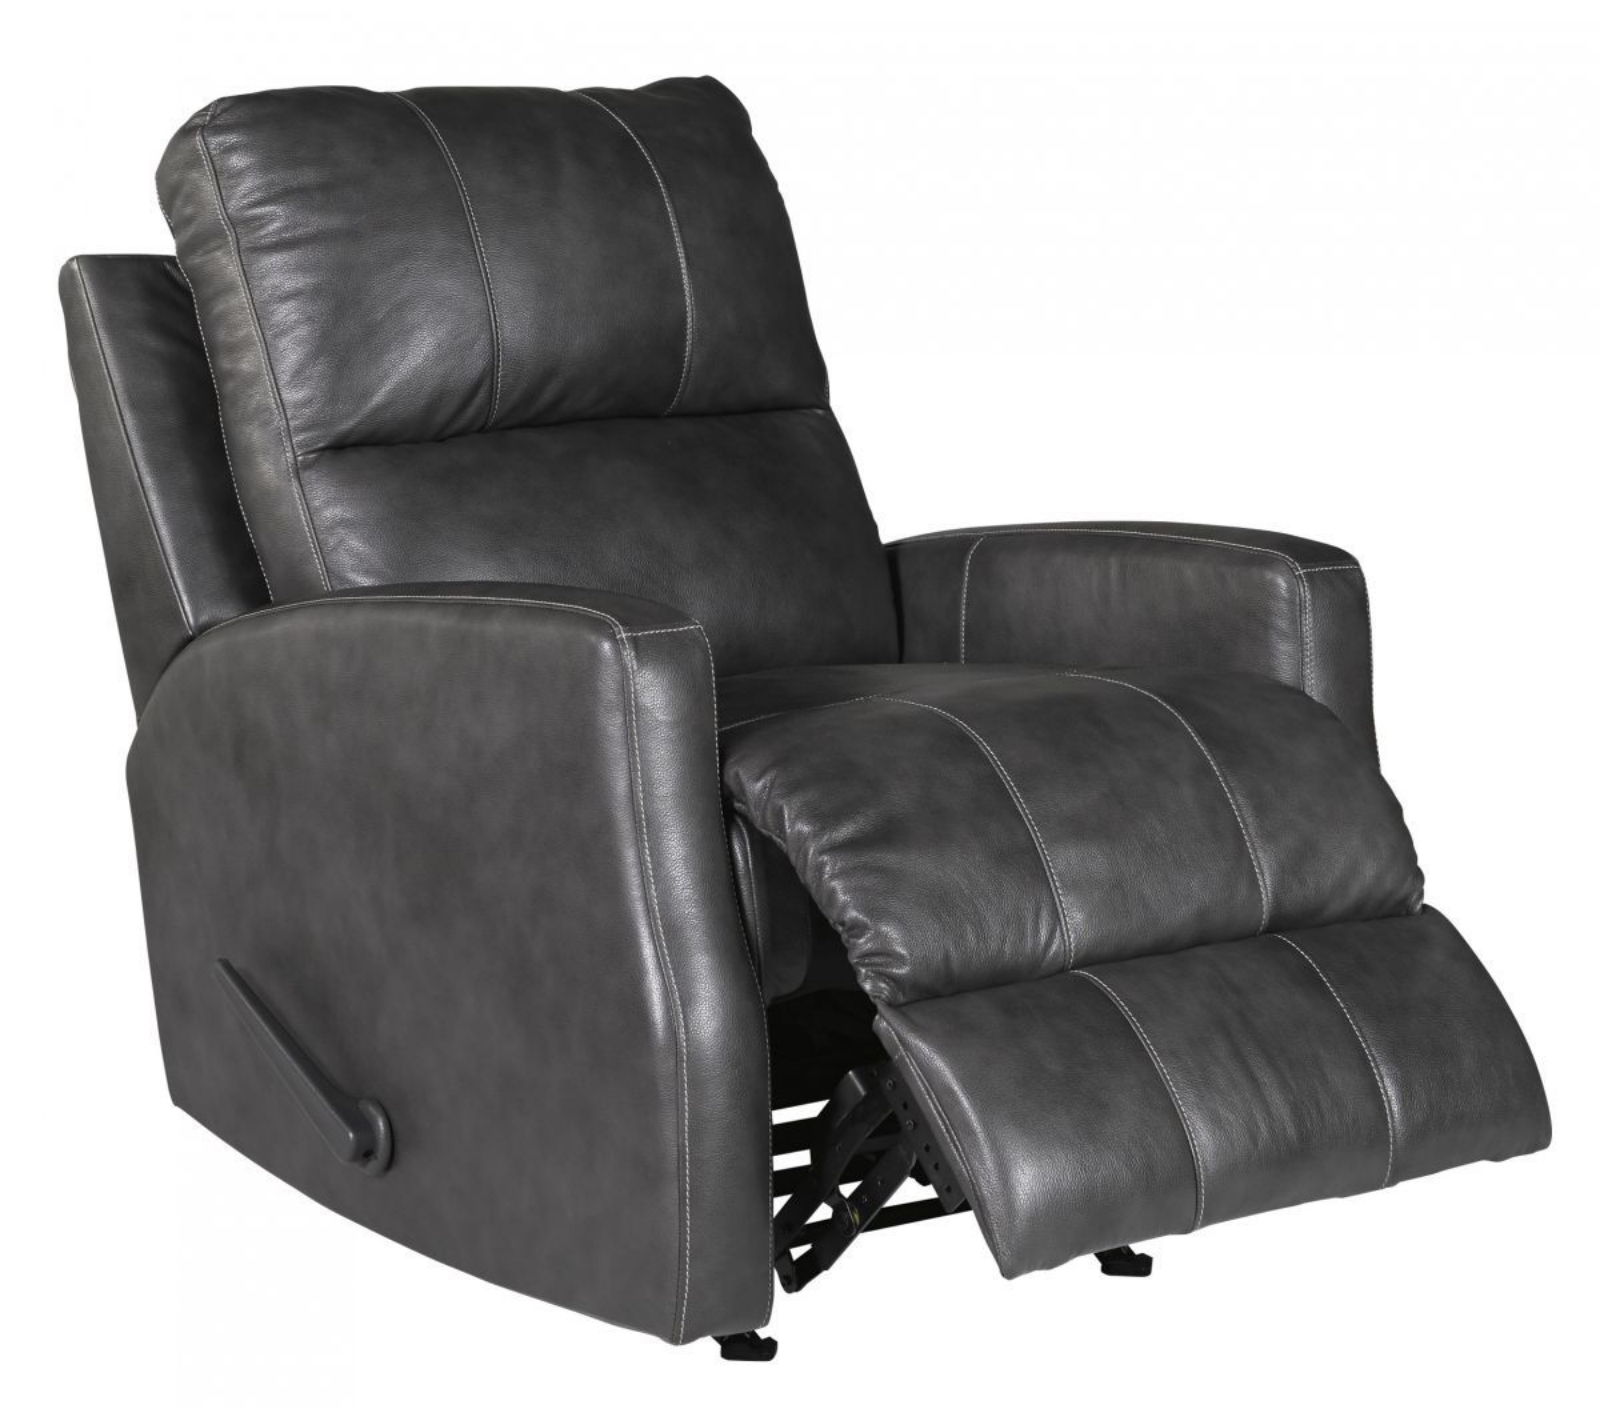 Picture of Gulfbay Recliner